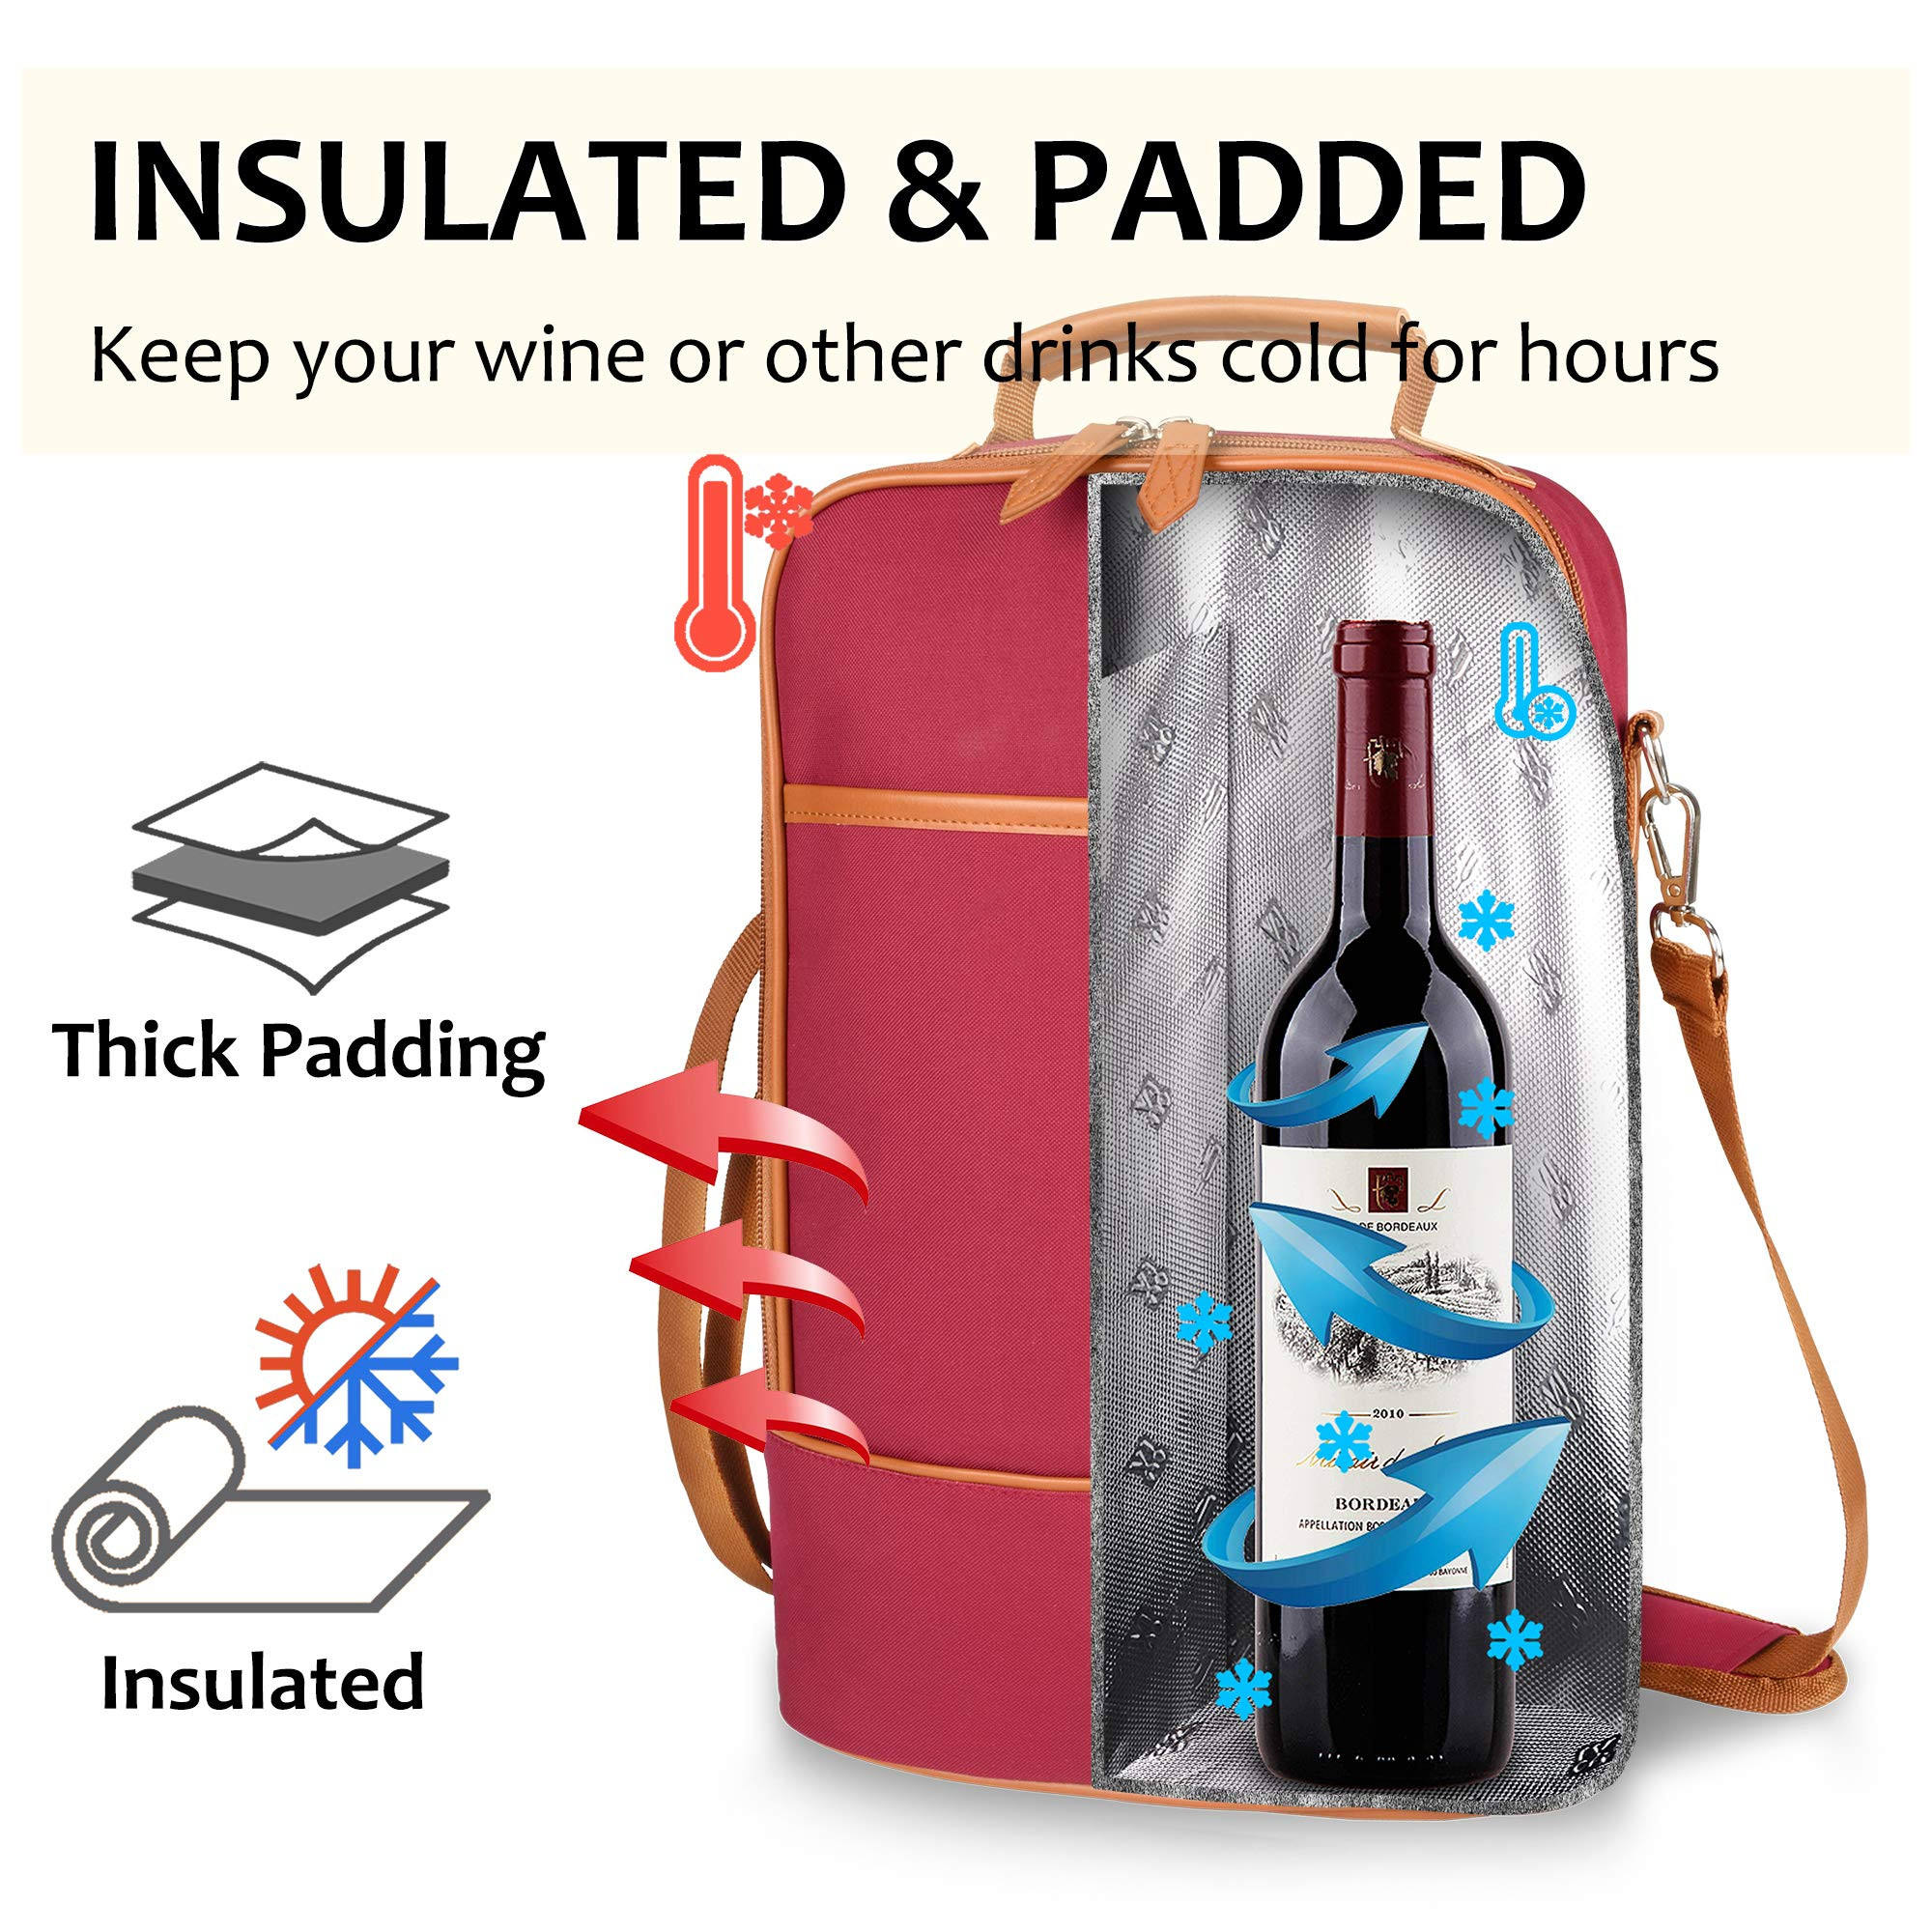 Private label Insulated 2 Bottle thermal Wine Tote cooler Bag Carrier for men women gift with dividers and padded shoulder st